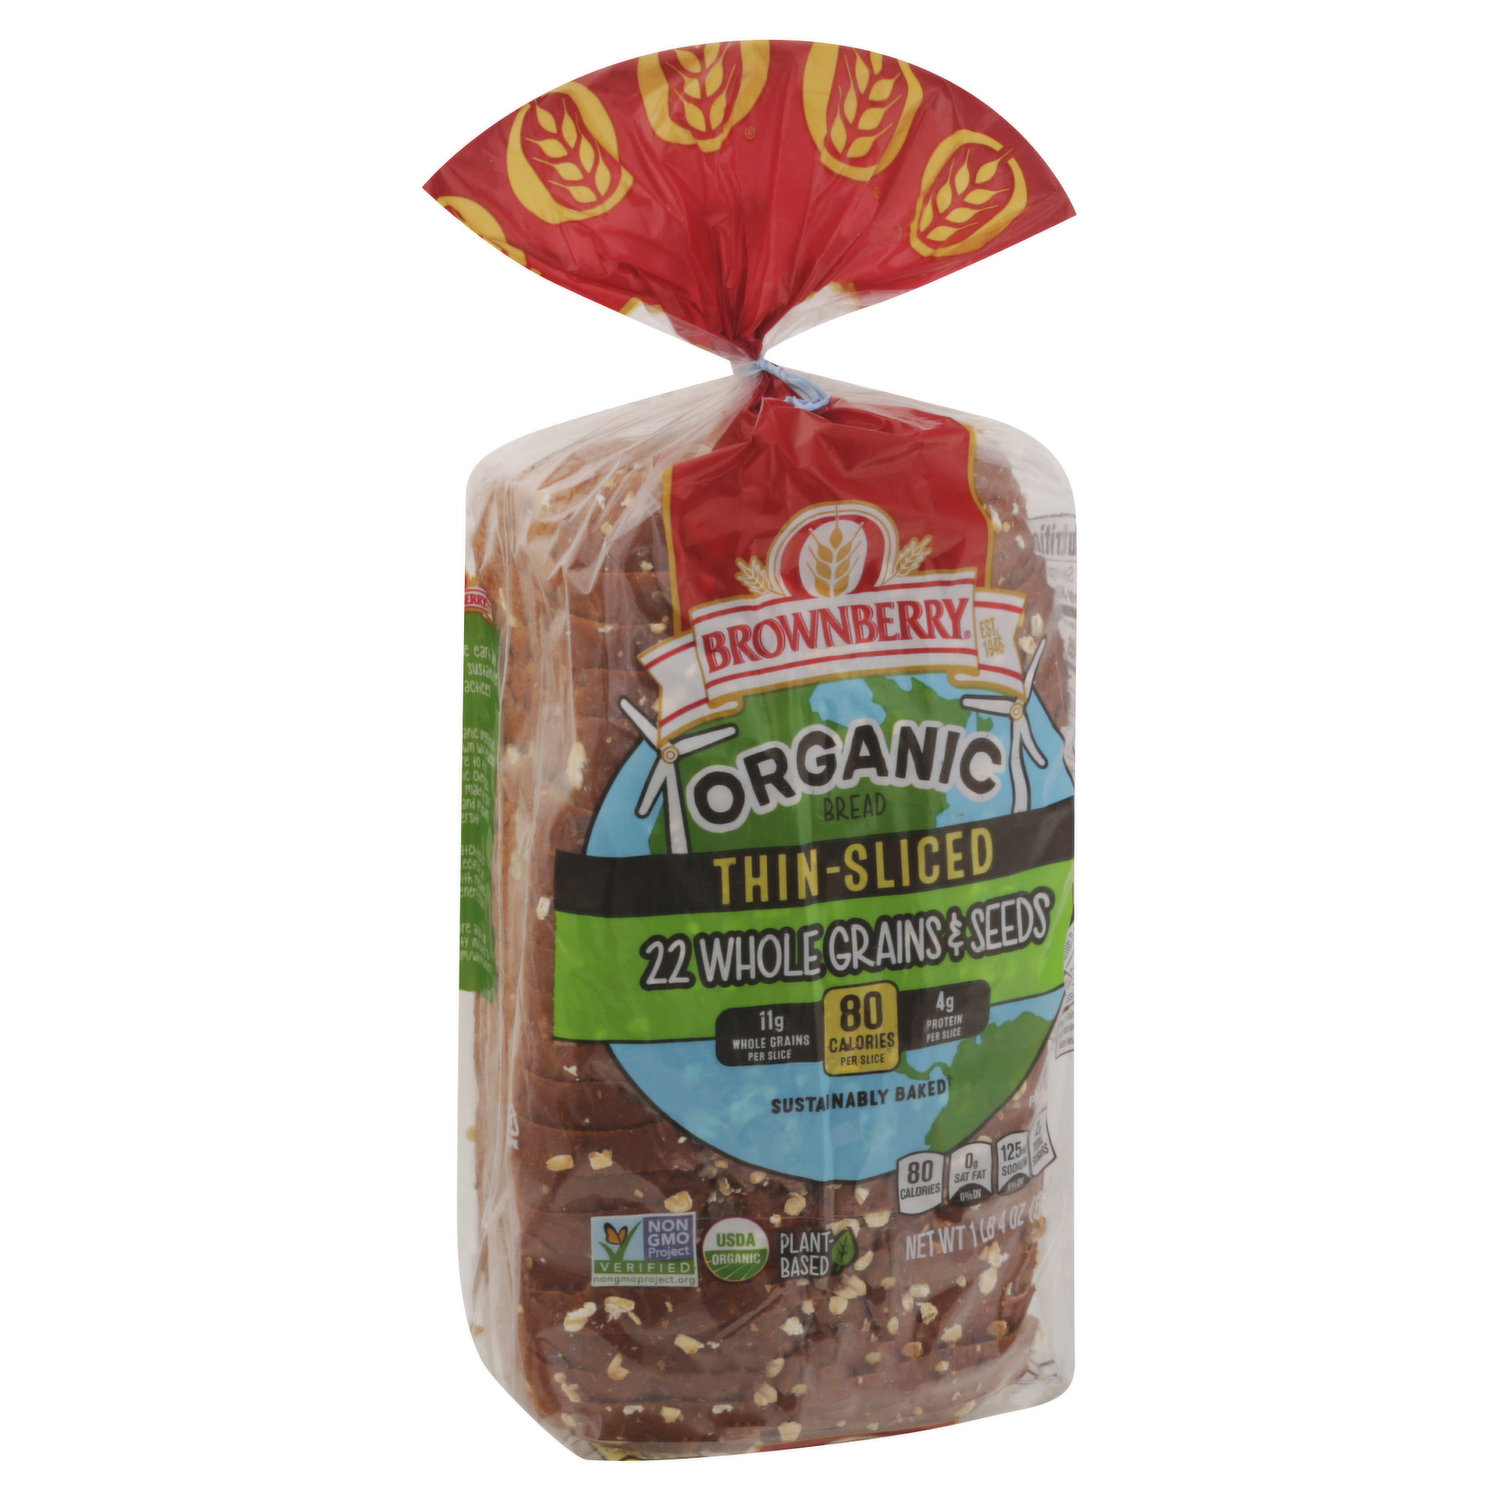 Brownberry Bread, Organic, 22 Whole Grains & Seeds, Thin-Sliced, 20 Ounce